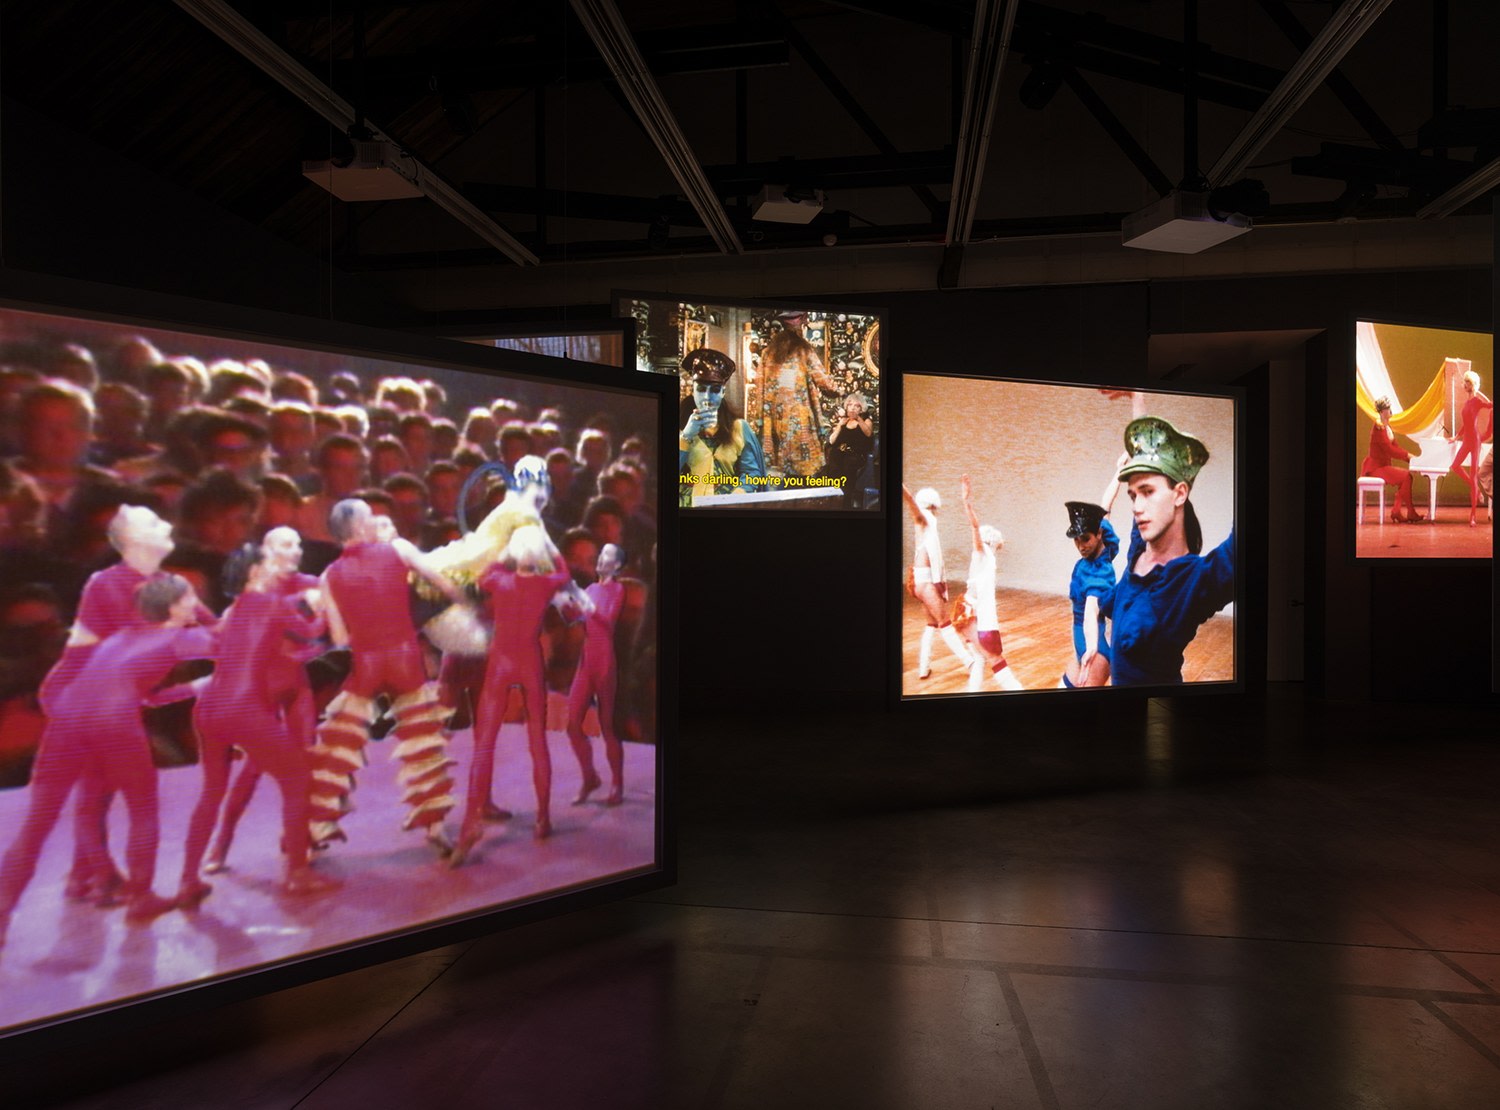 4 video screens in an art gallery showing dance routines